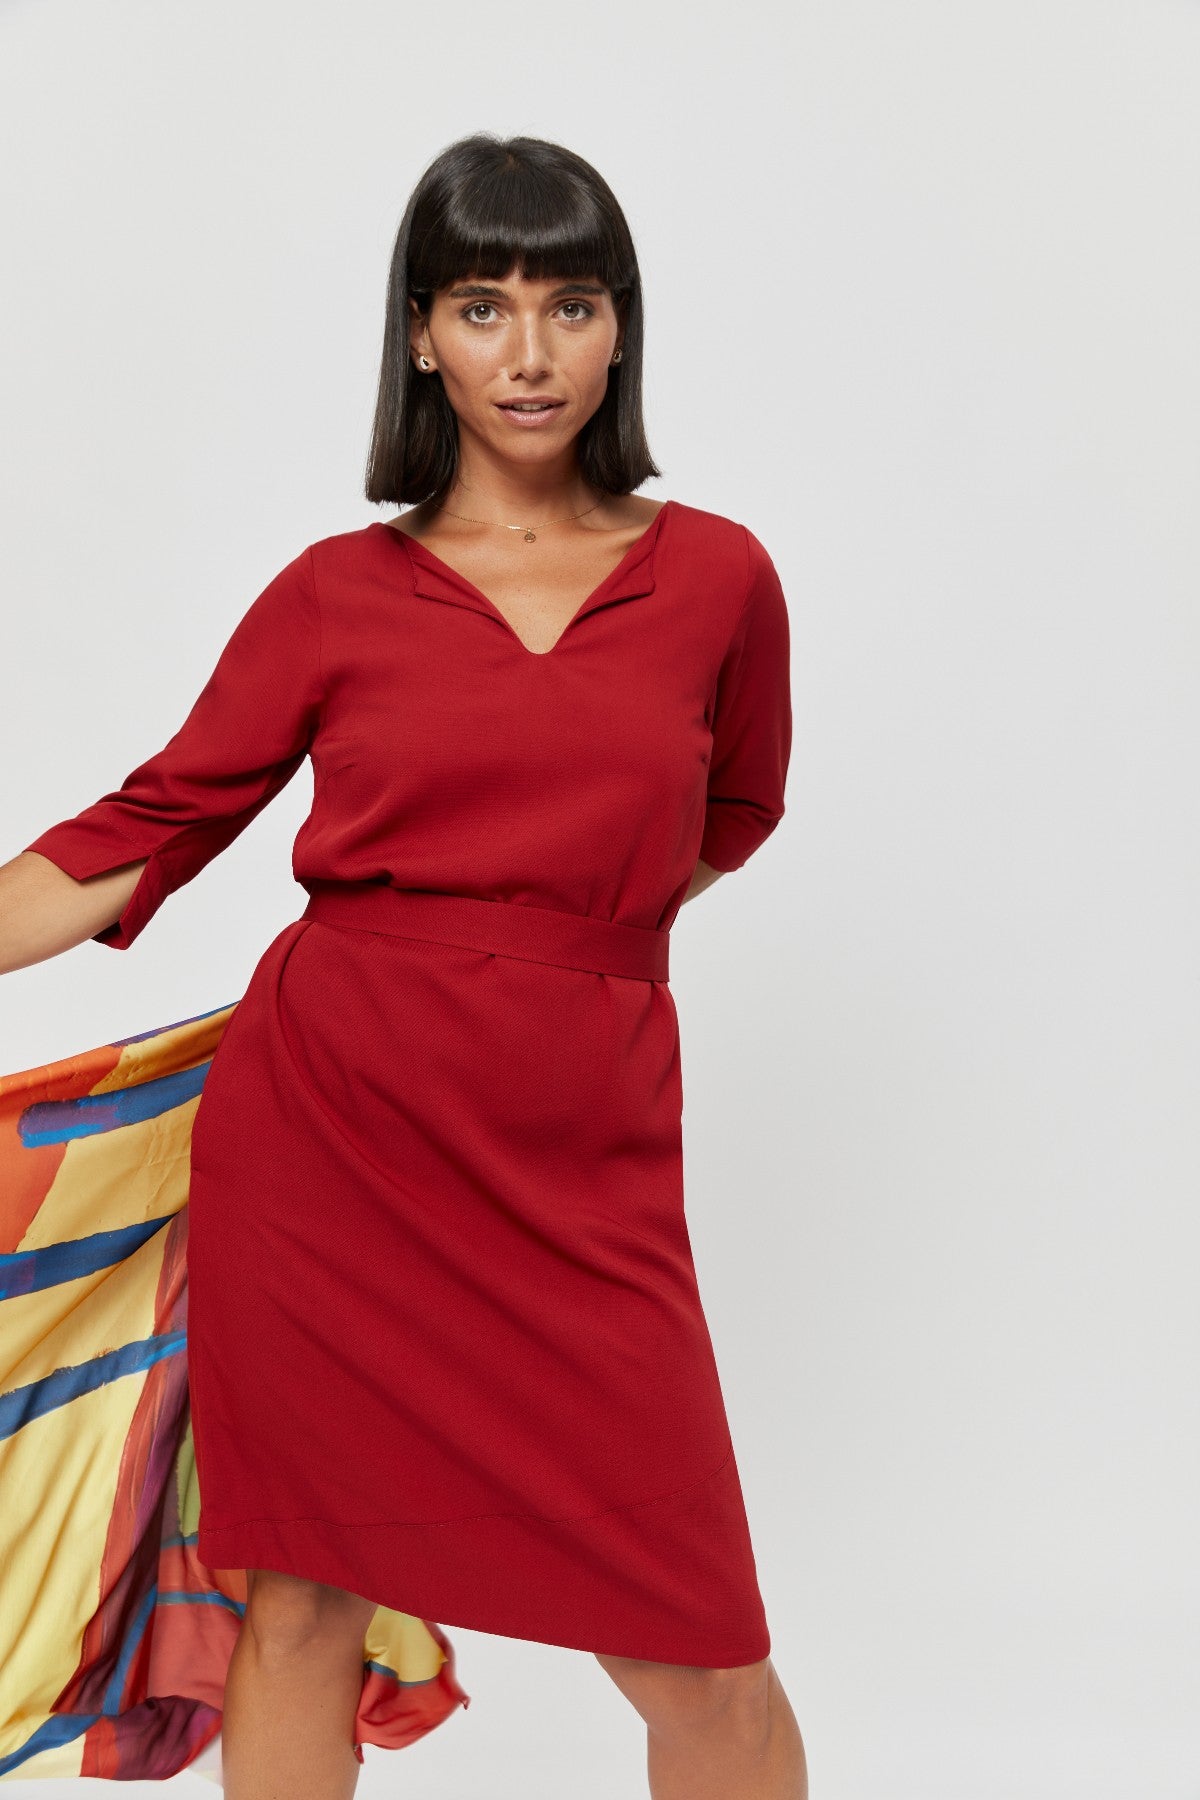 Red A Line Dress CATHERINE. Formal Midi Work Dress in Red · Belted Dress with Pockets - AYANI